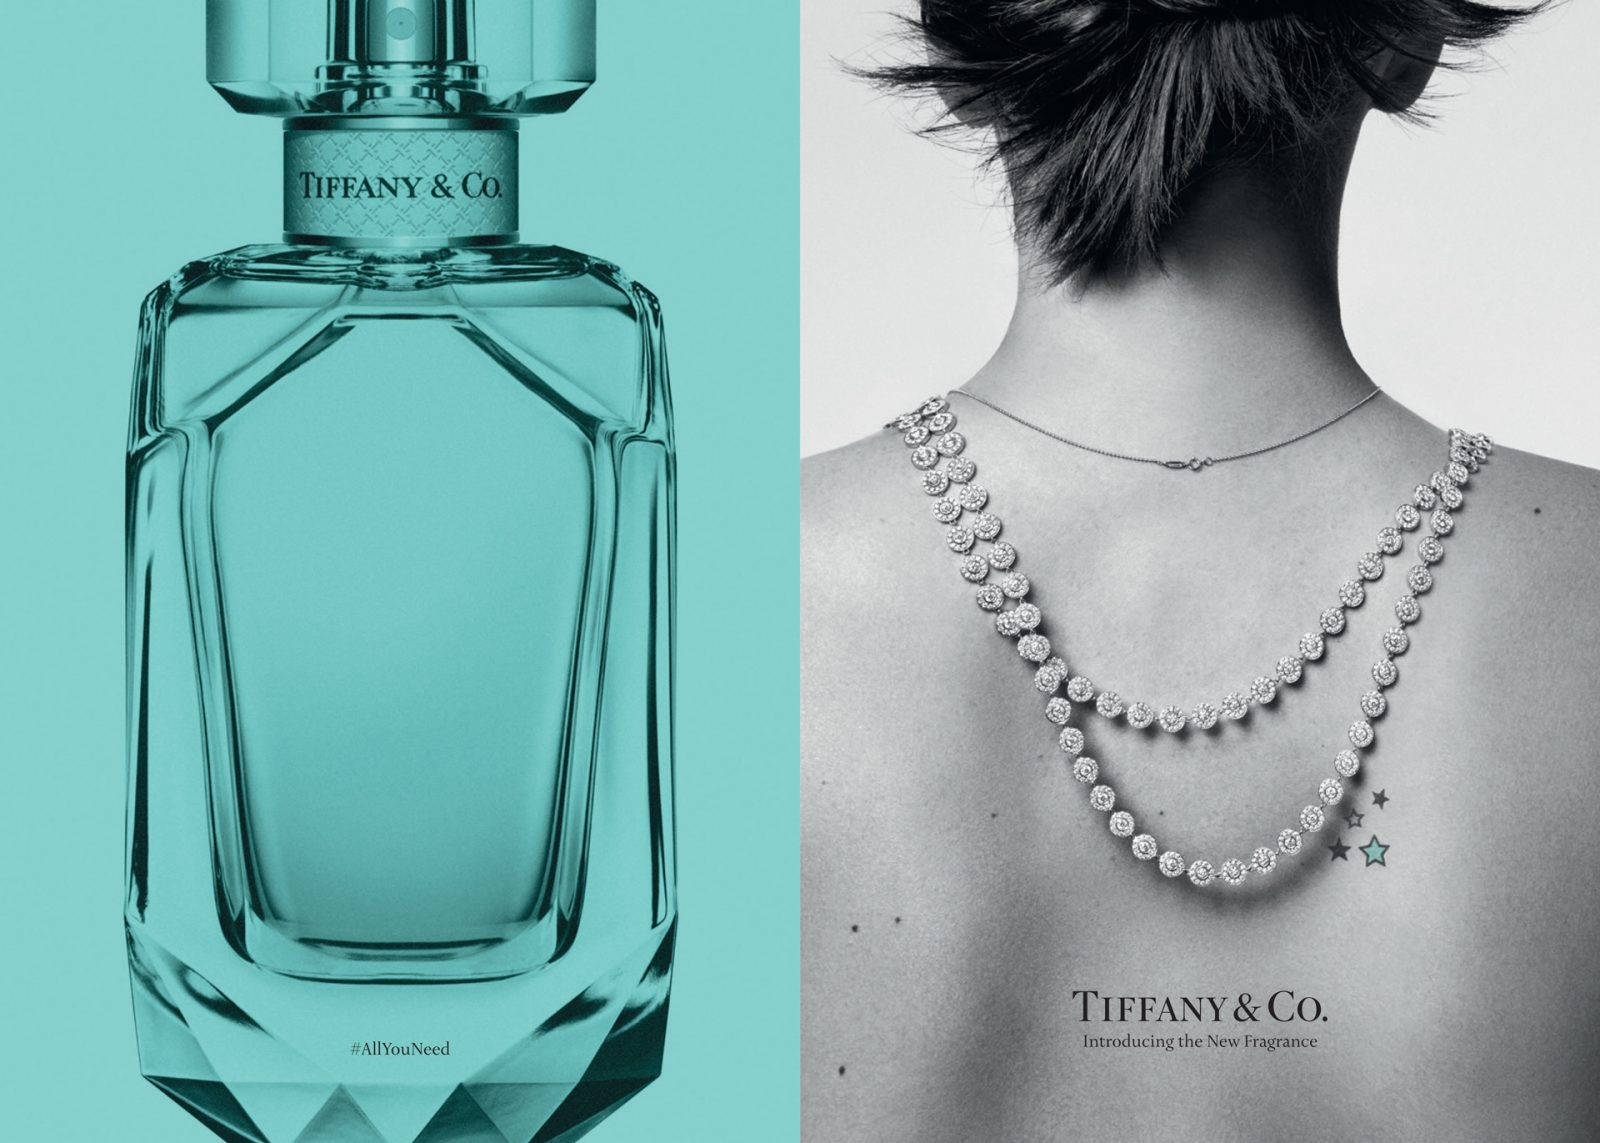 Tiffany Shares Lose Their Sparkle as LVMH Pulls the Plug on $16.2